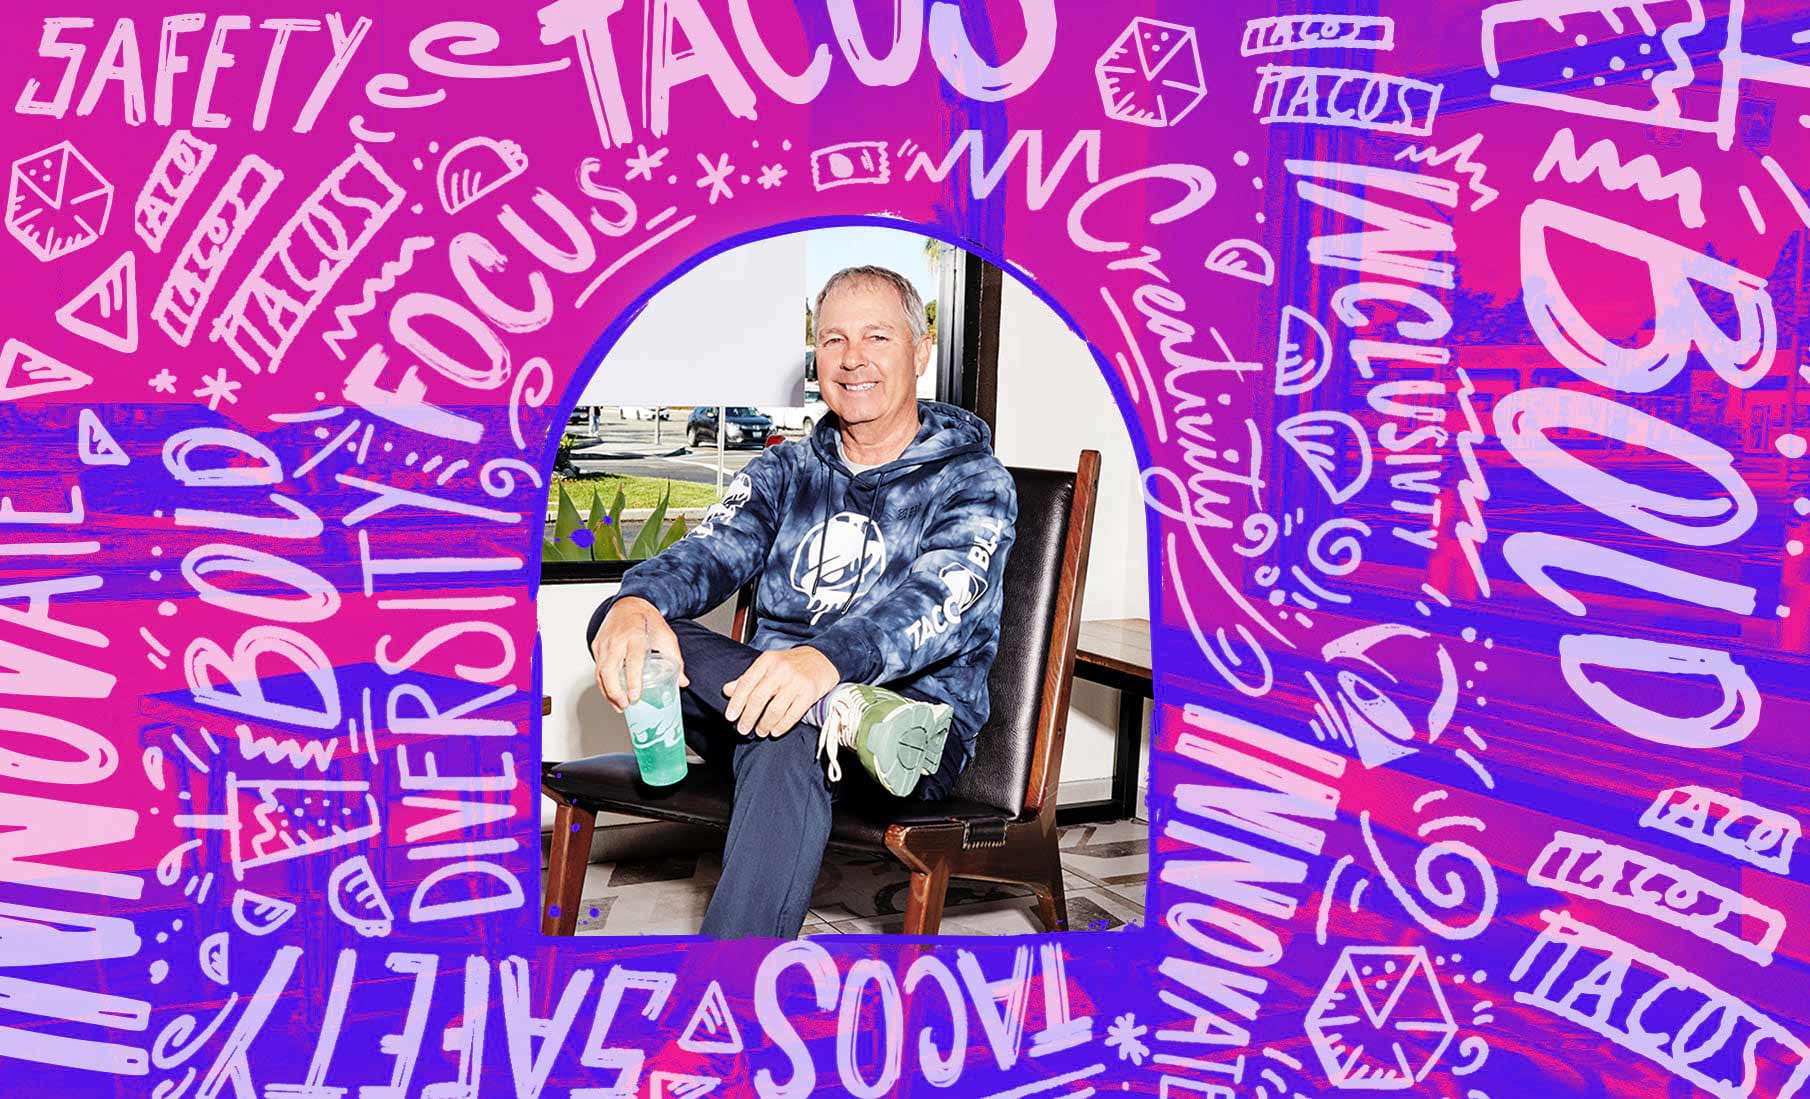 EP 8: Putting People First at Taco Bell From One Generation to the Next